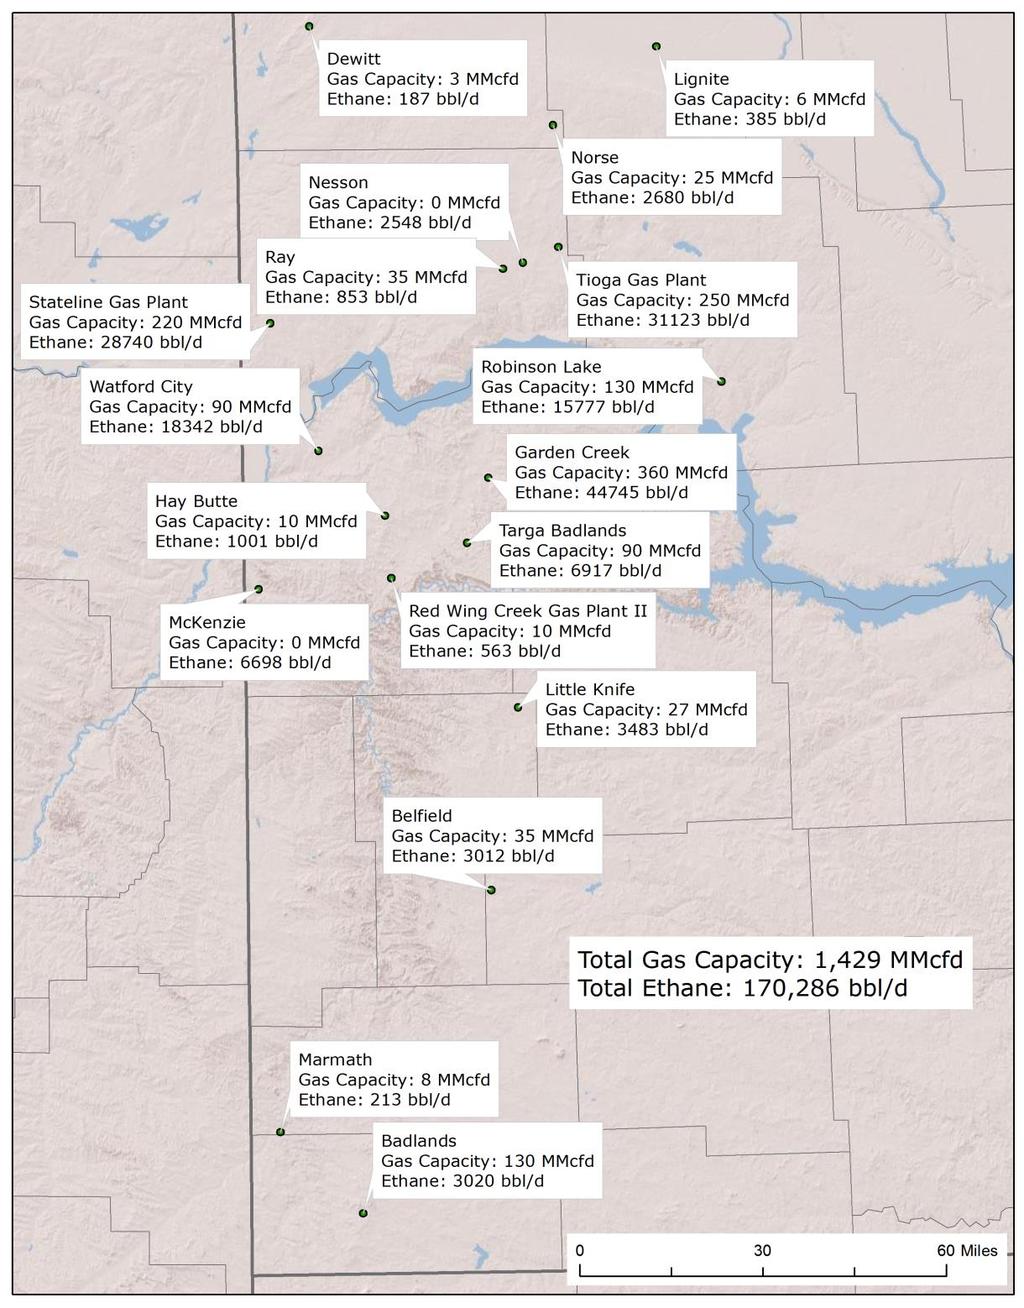 North Dakota Gas Plant Capacity - Total gas processing capacity in ND 1400 MMcfd. - Total ethane entering ND gas plants 240 MMcfd (170,000 bbl/d).